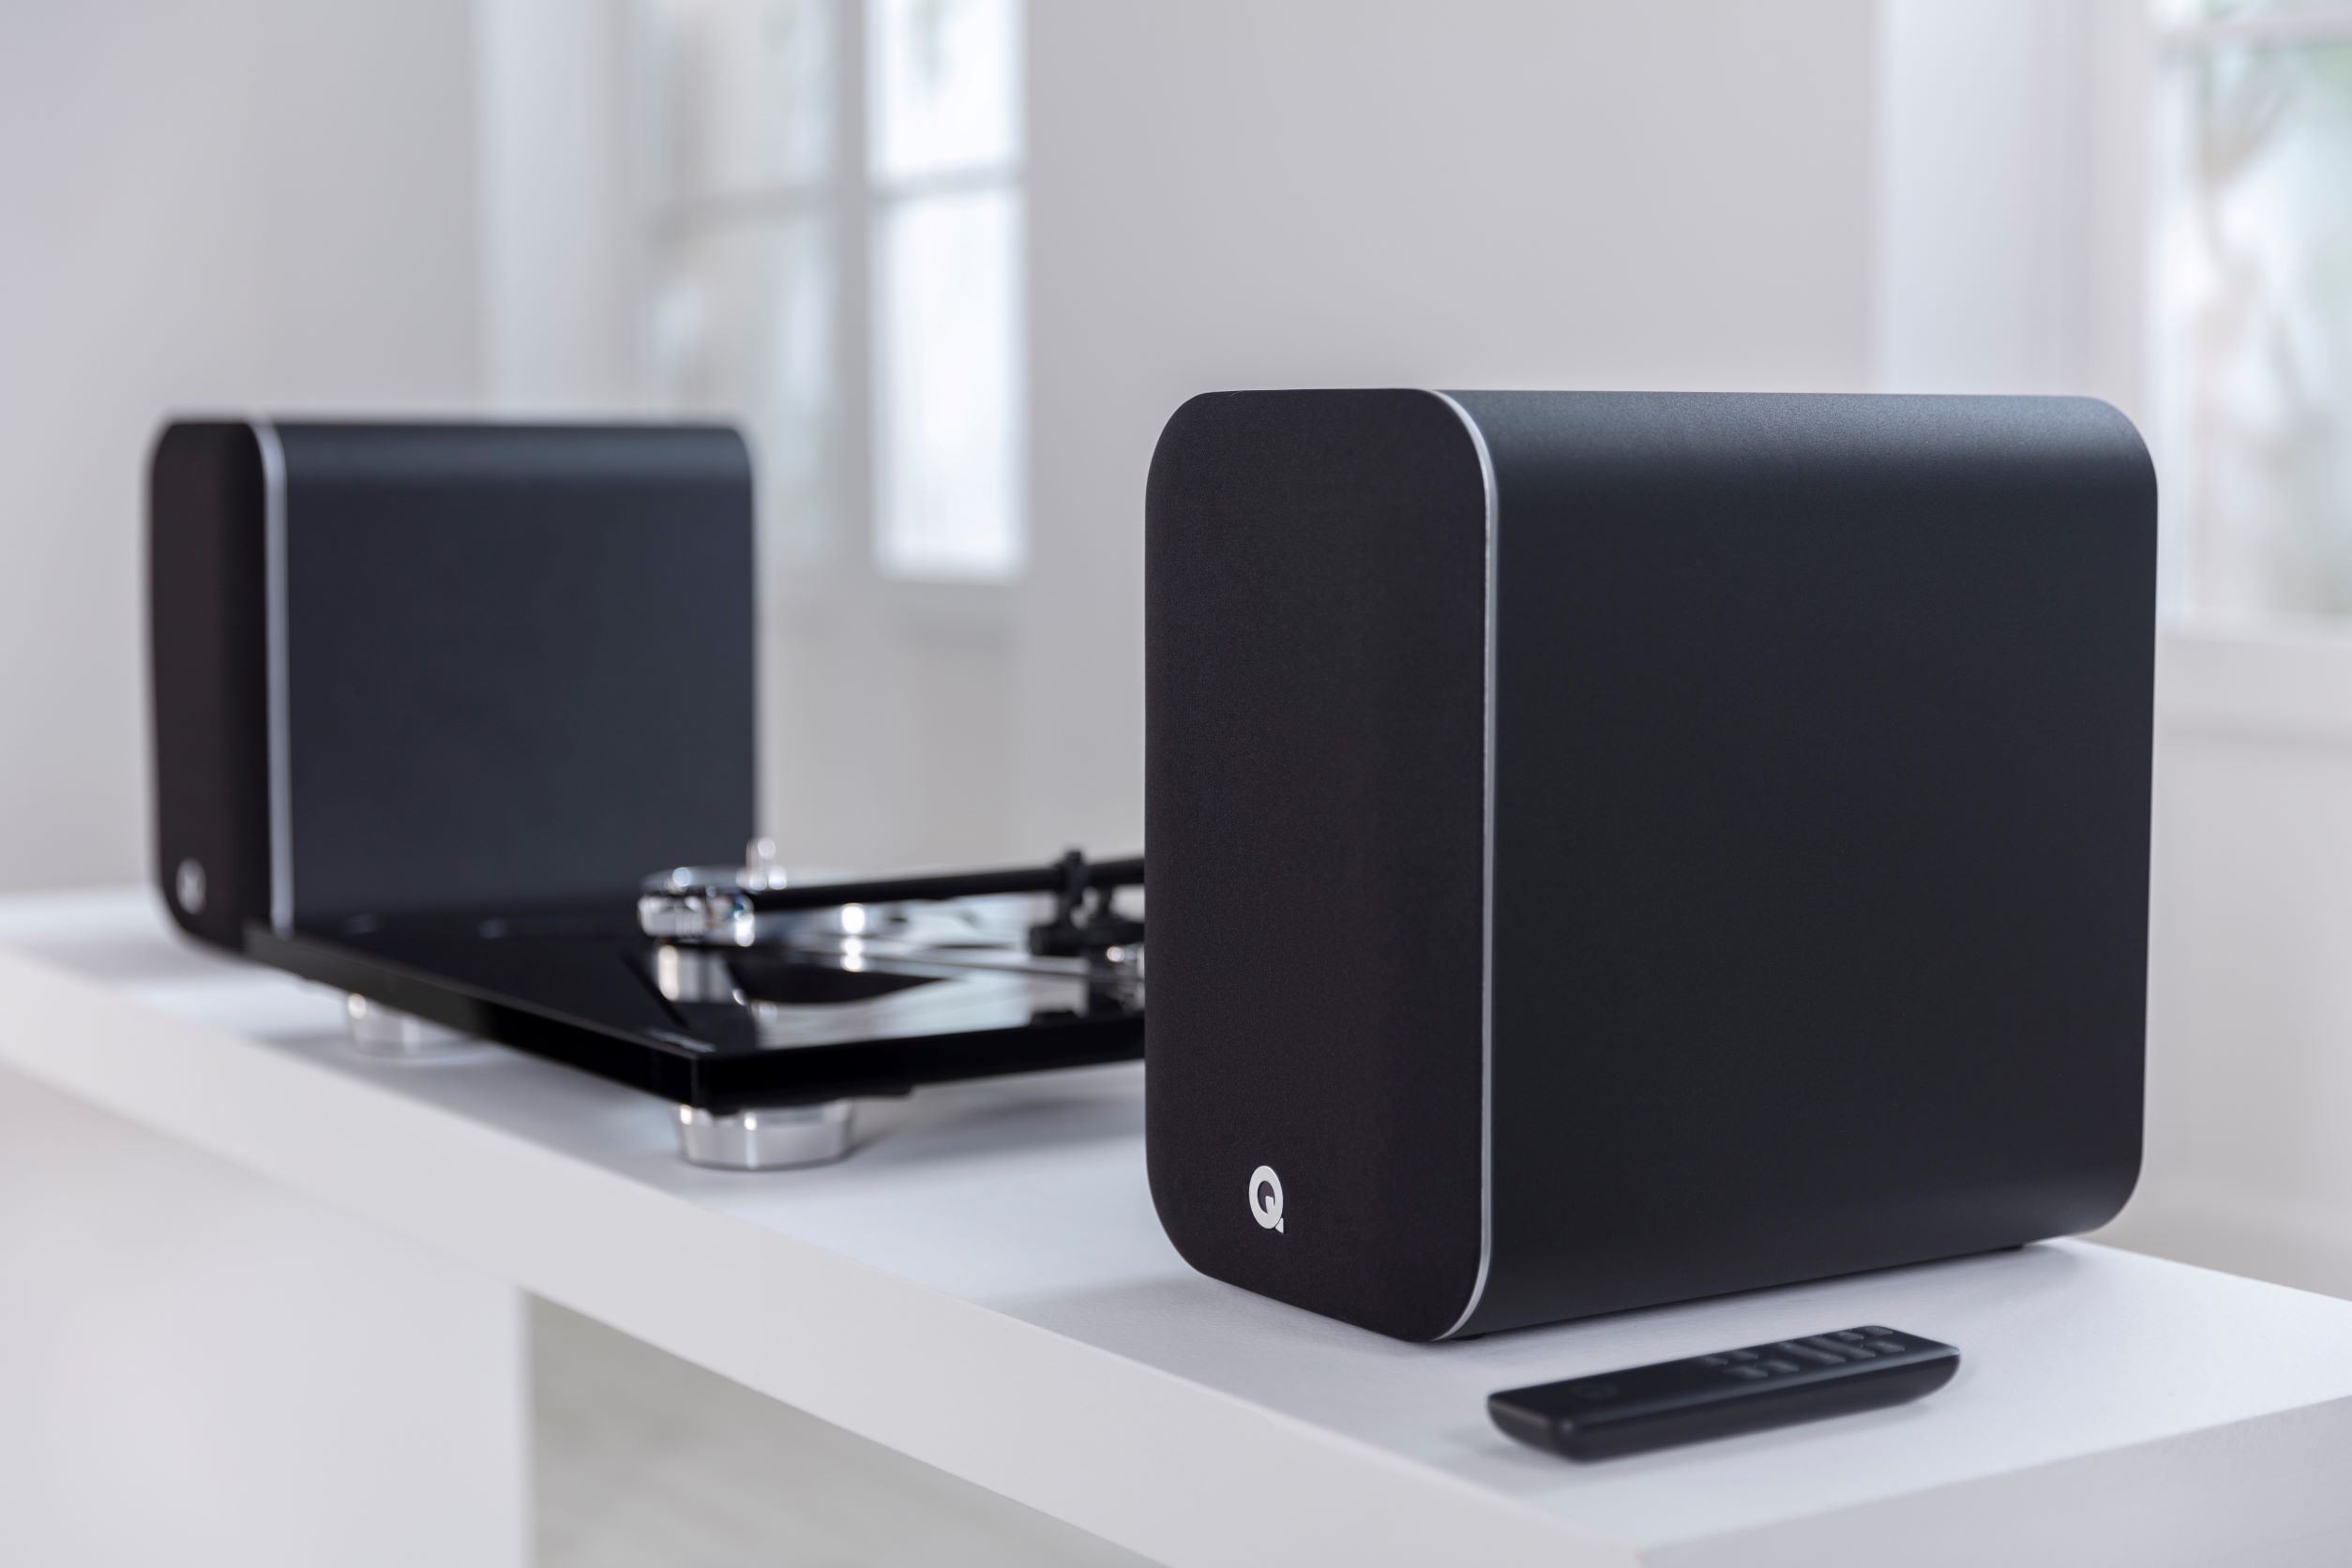 Q Acoustics M20 HD Review: This $600 Hi-Fi System Is Eye-Opening!